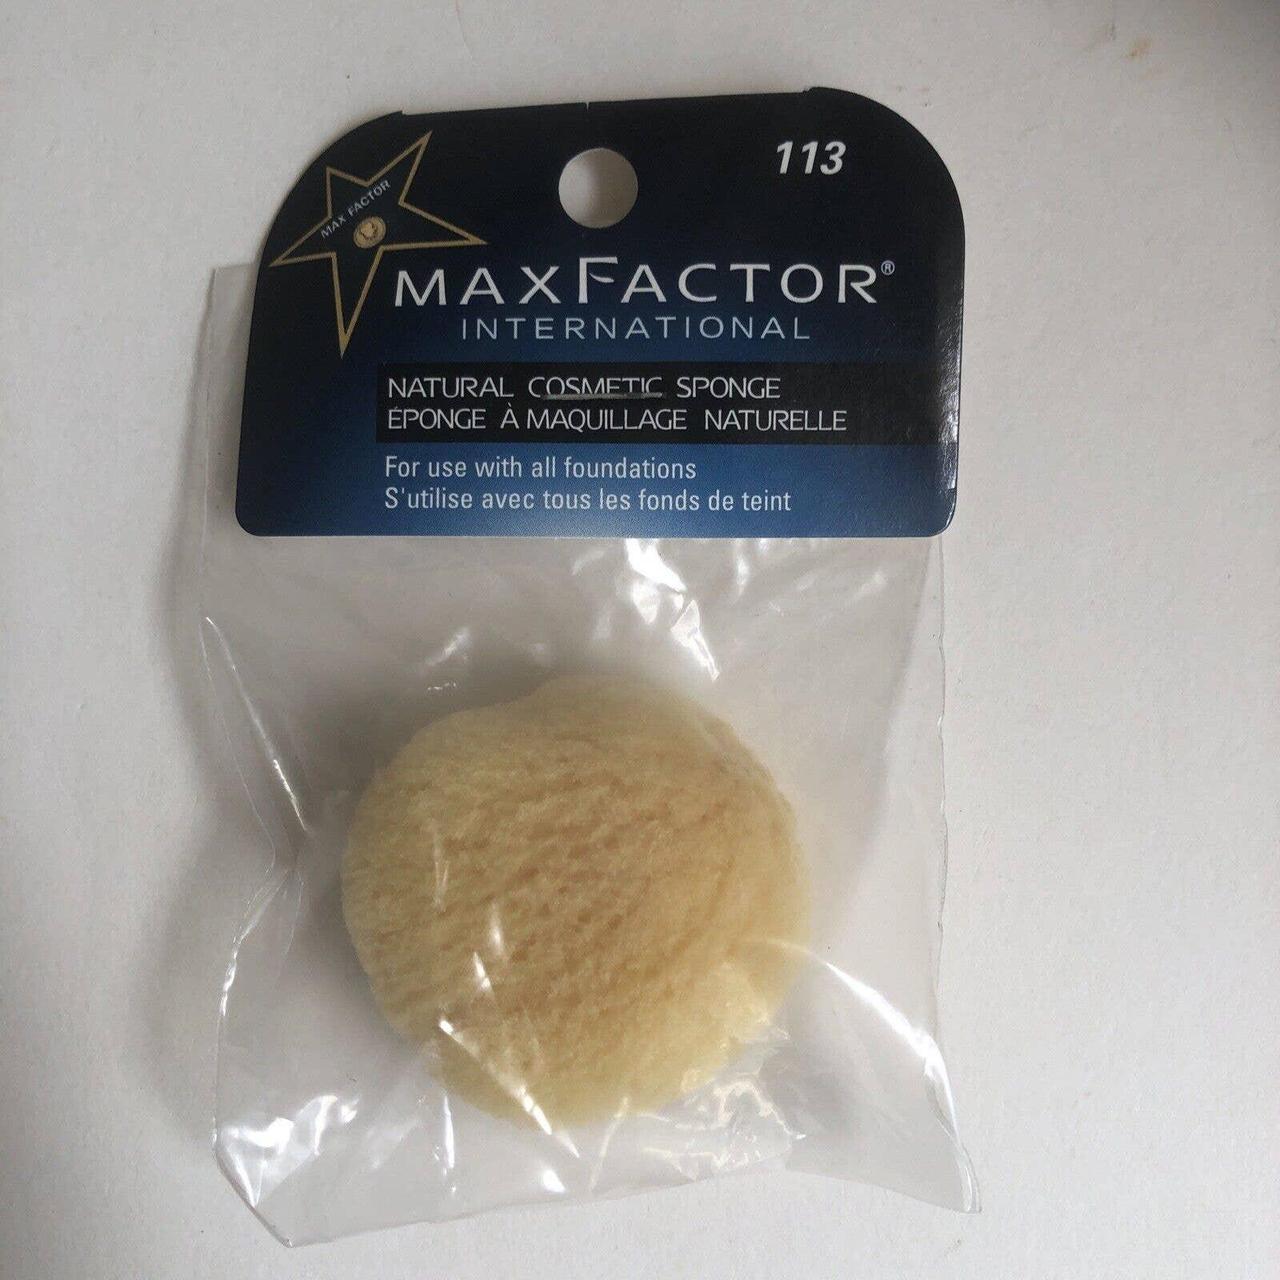 Product Image 1 - Max Factor International Natural Cosmetic